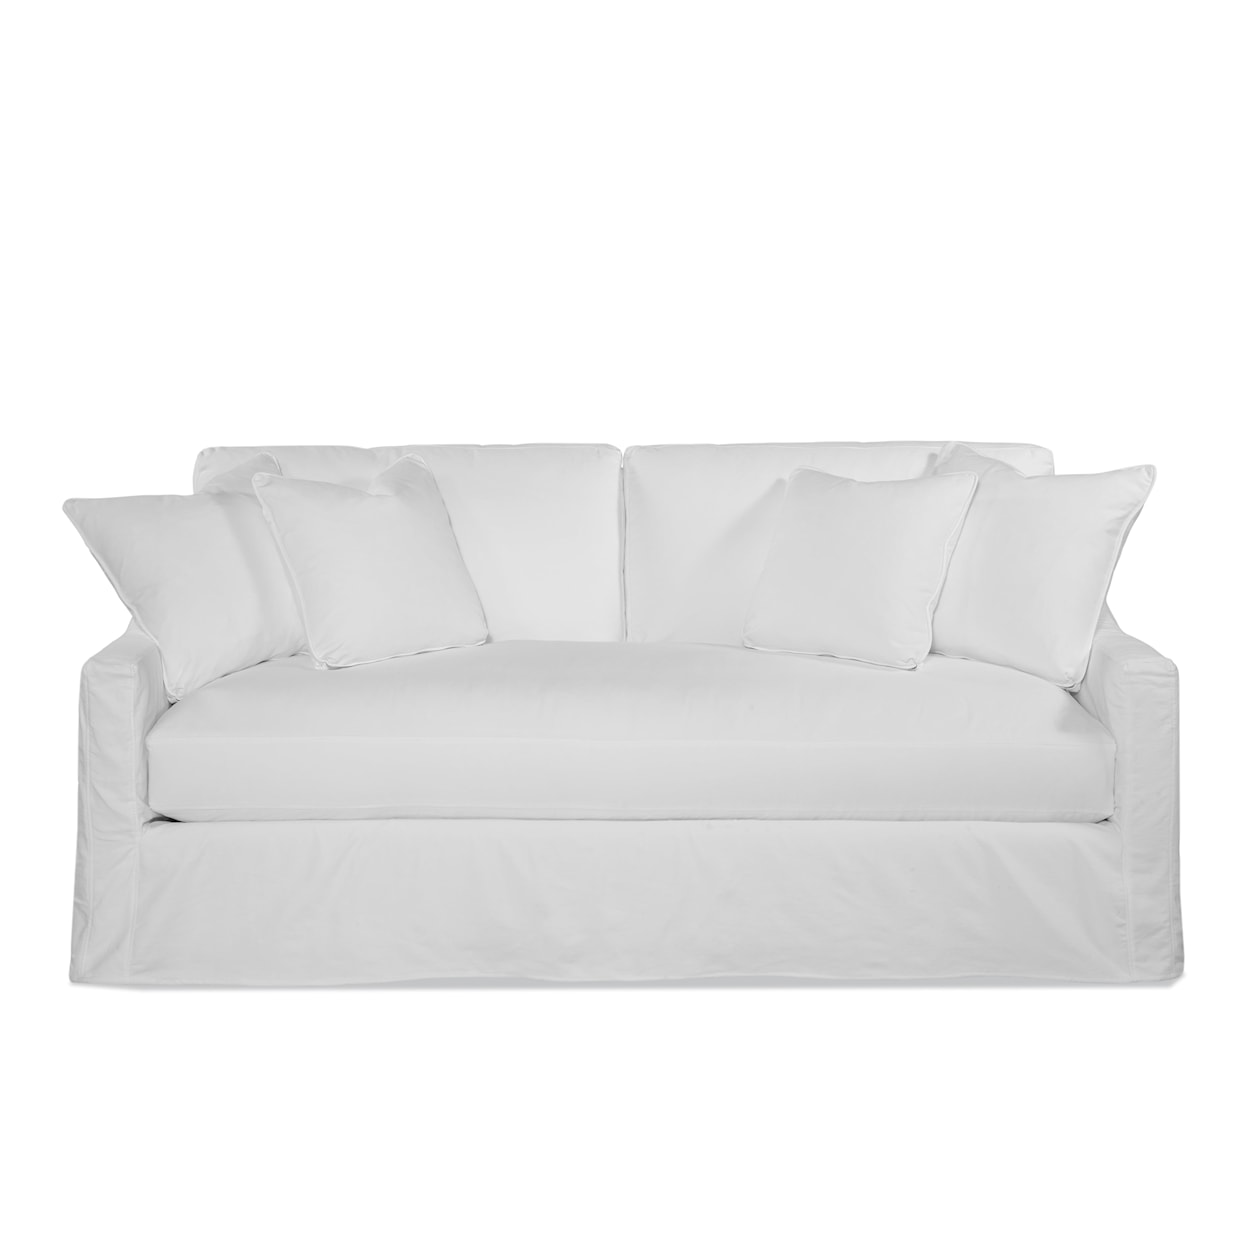 Braxton Culler Oliver Two over Bench Seat Sofa with Slipcover